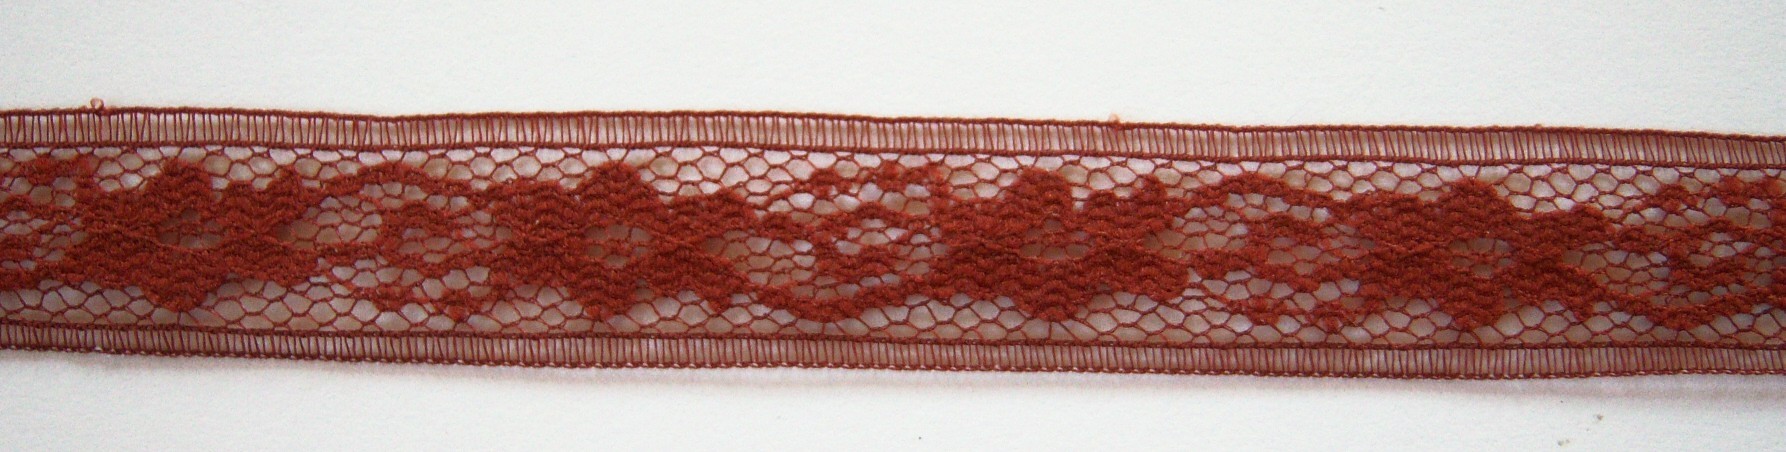 Sienna 3/4" Lace